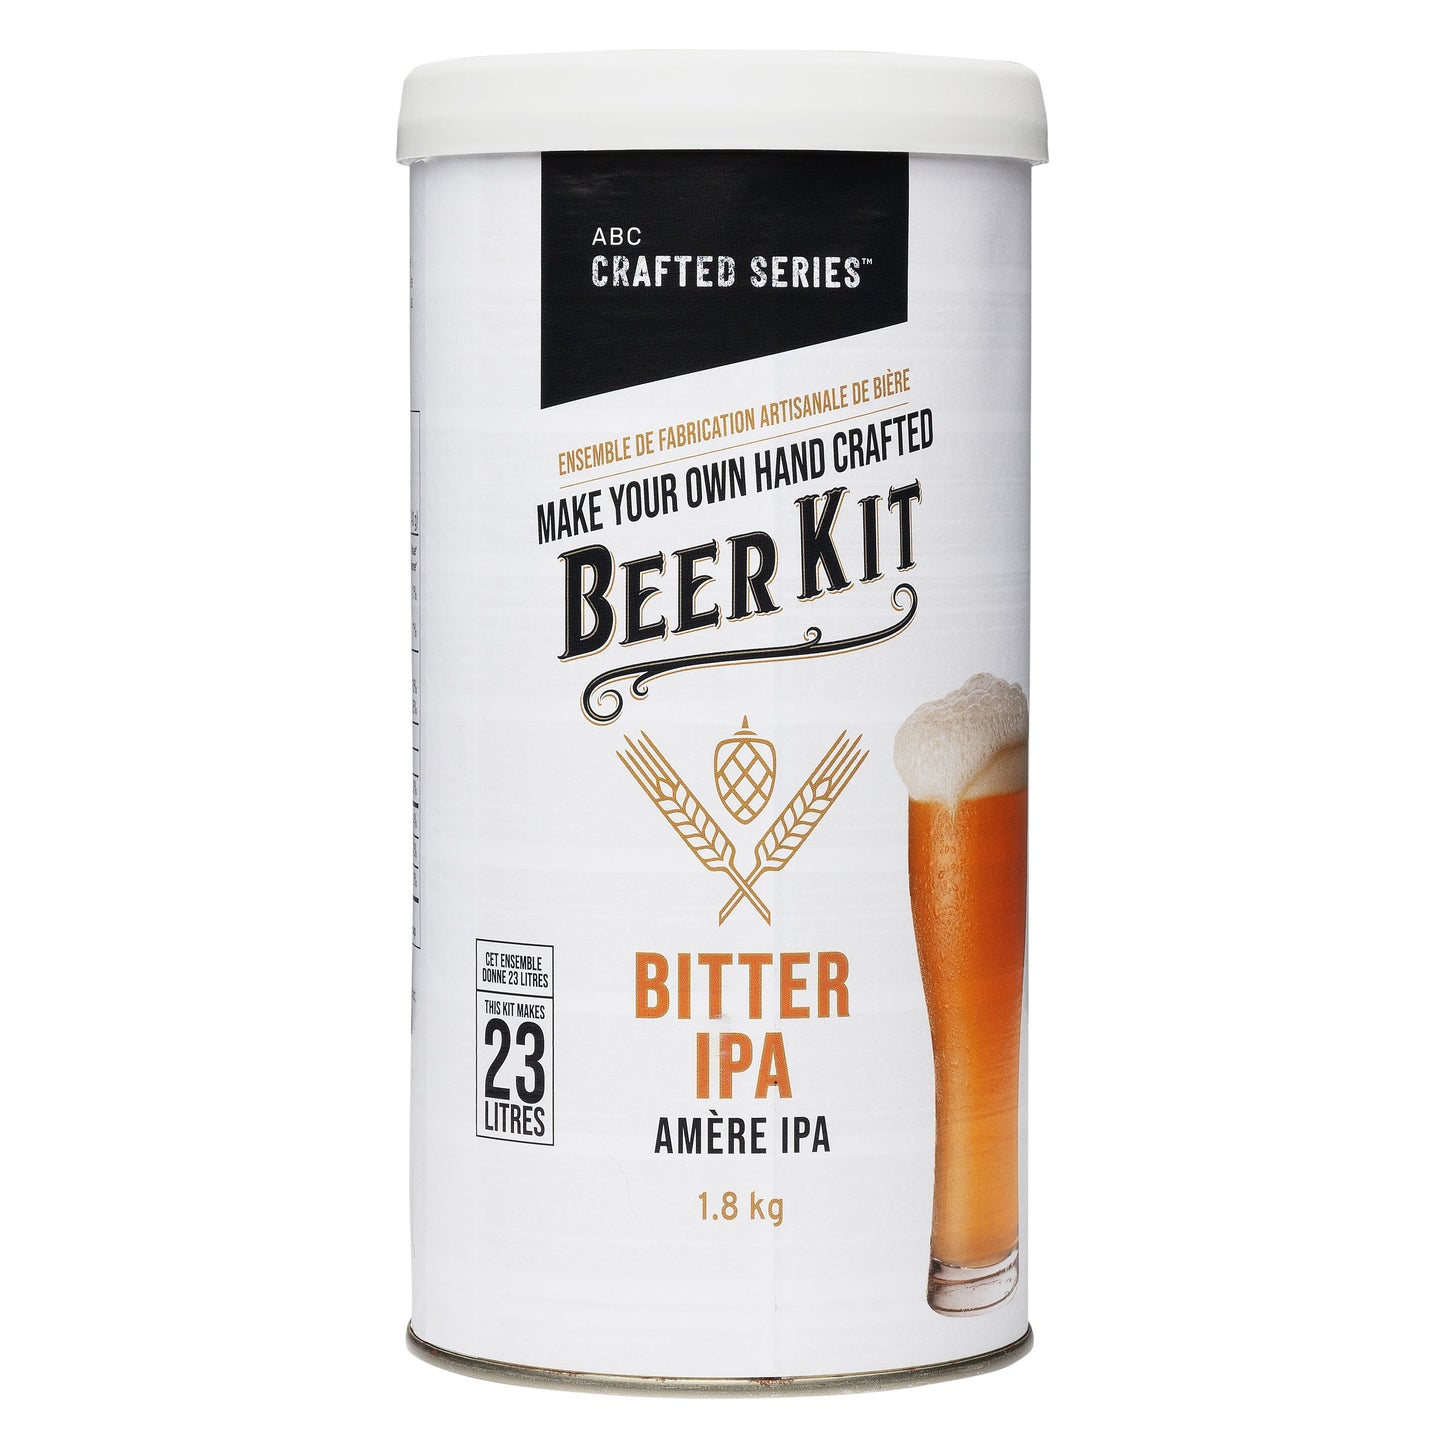 ABC Crafted Series Bitter IPA